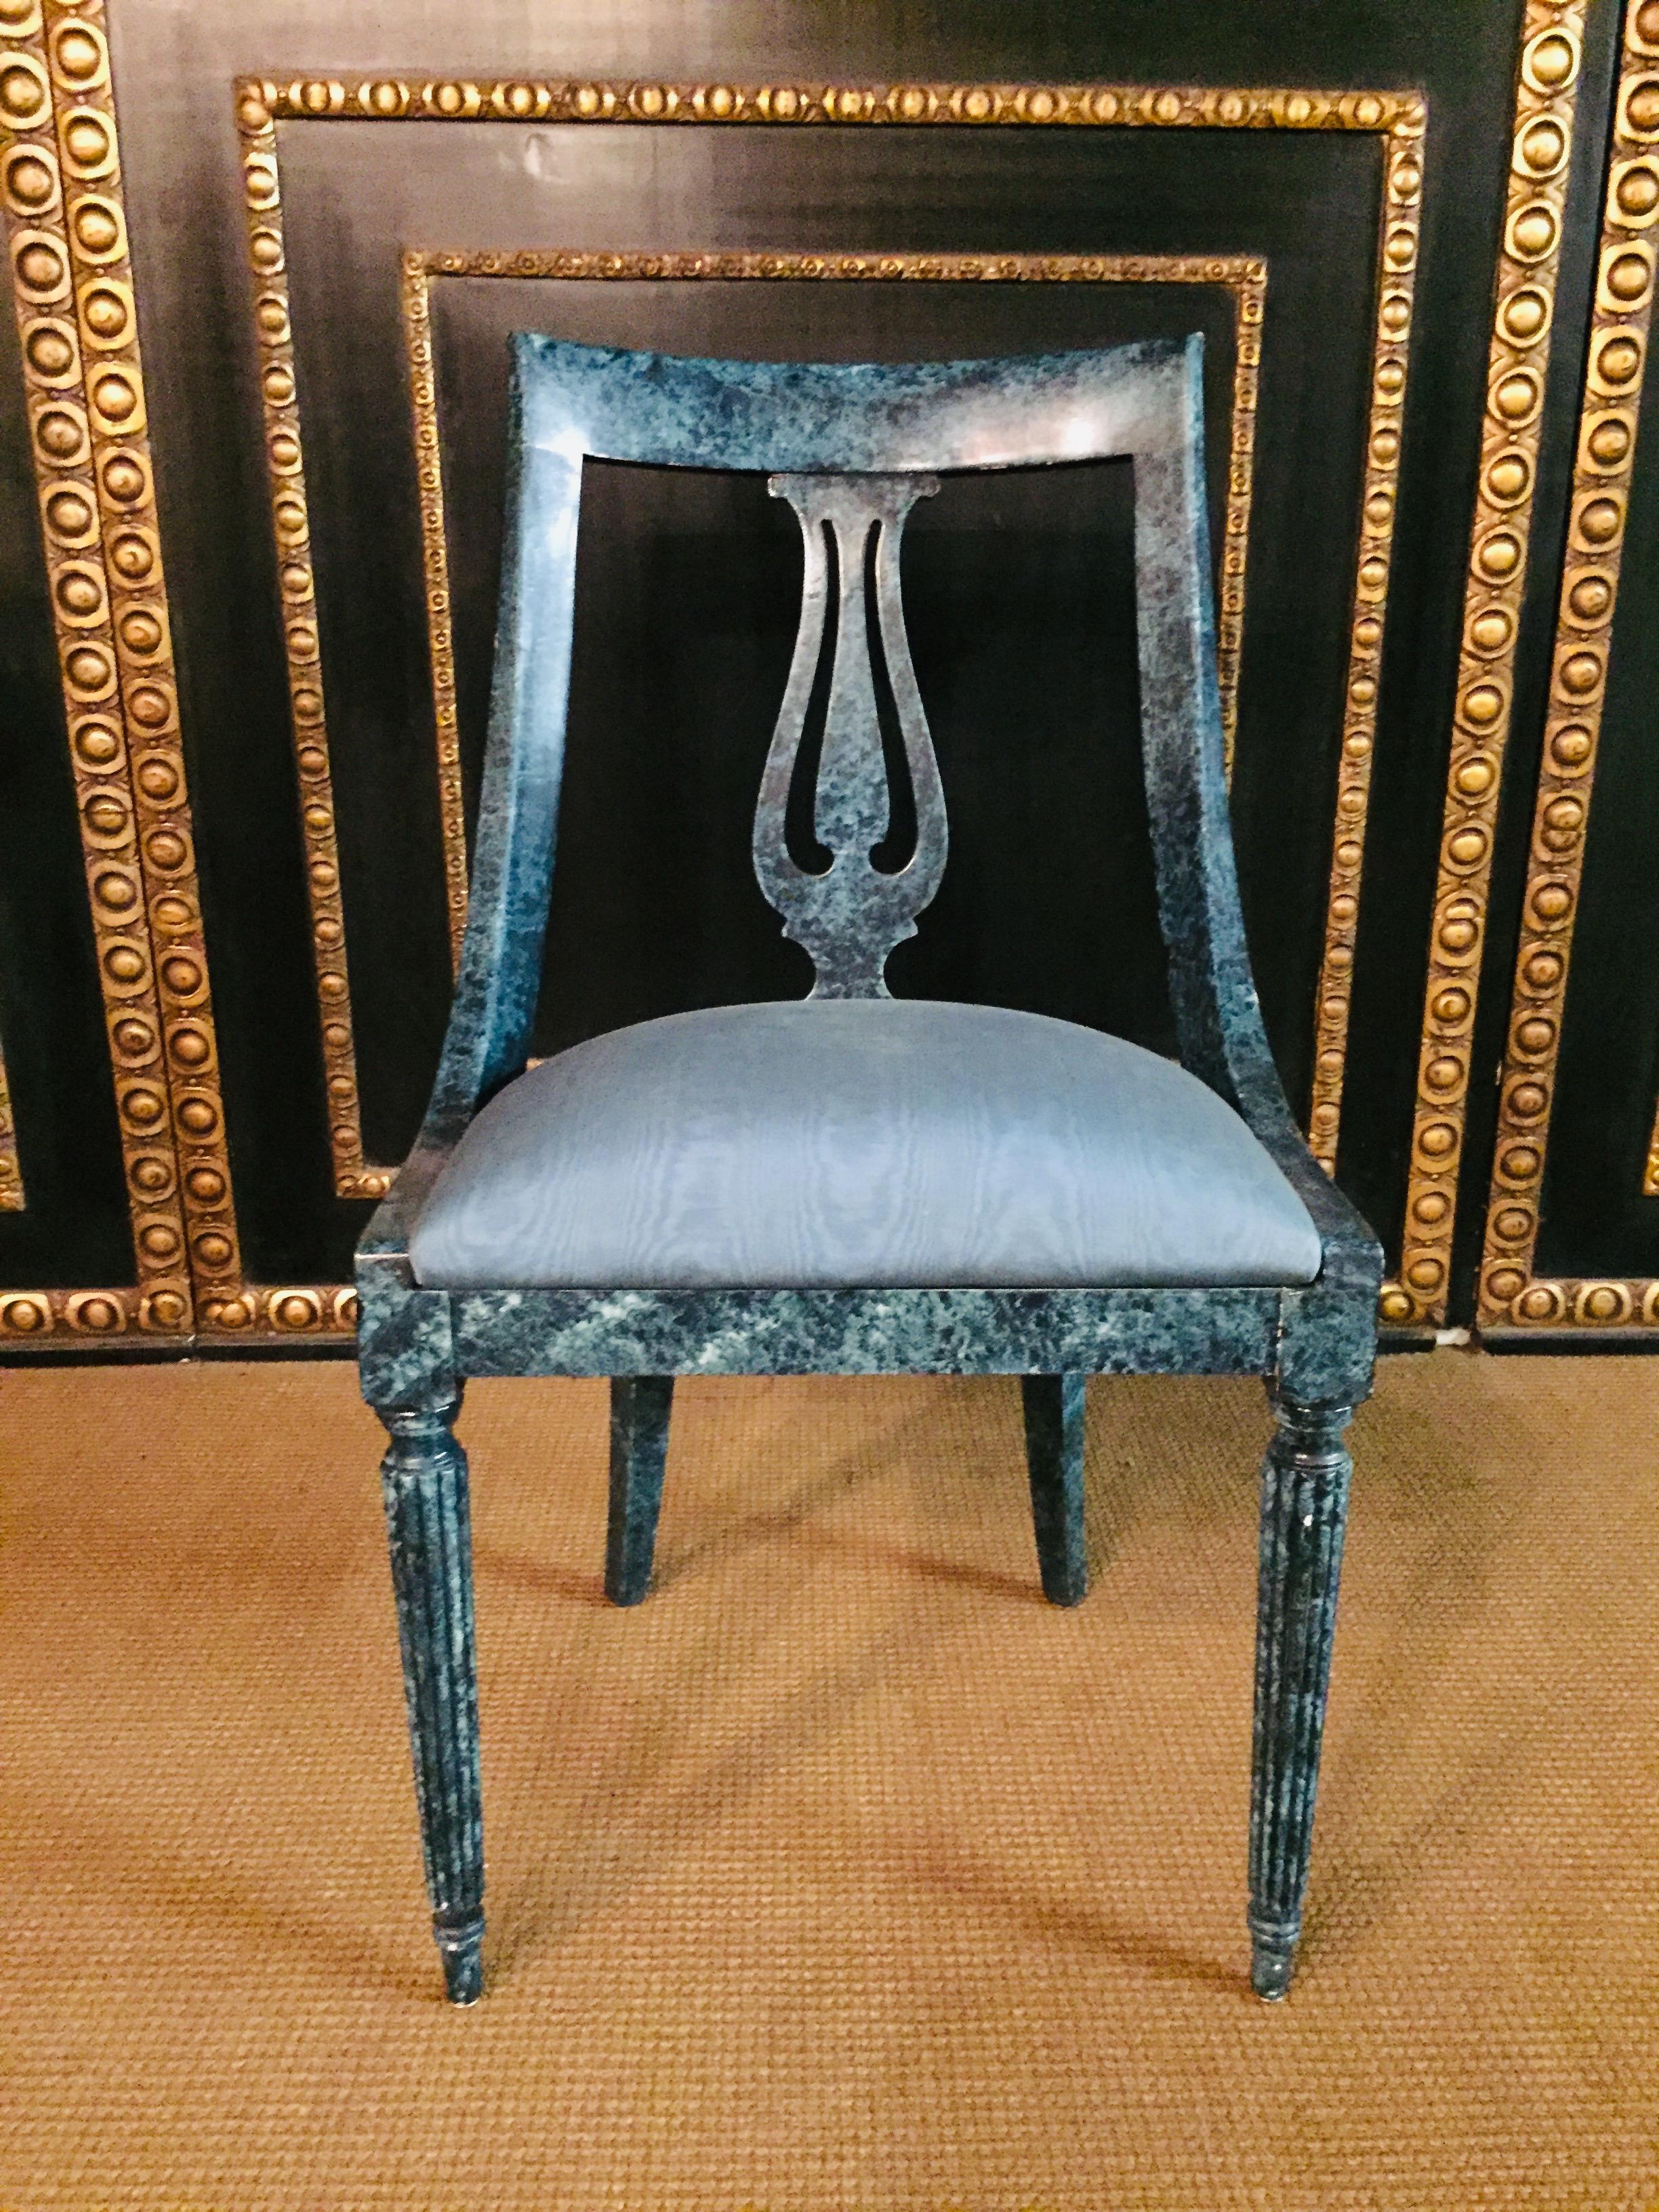 8 Chairs in the Modern Empire Style Turquoise Marbled 2